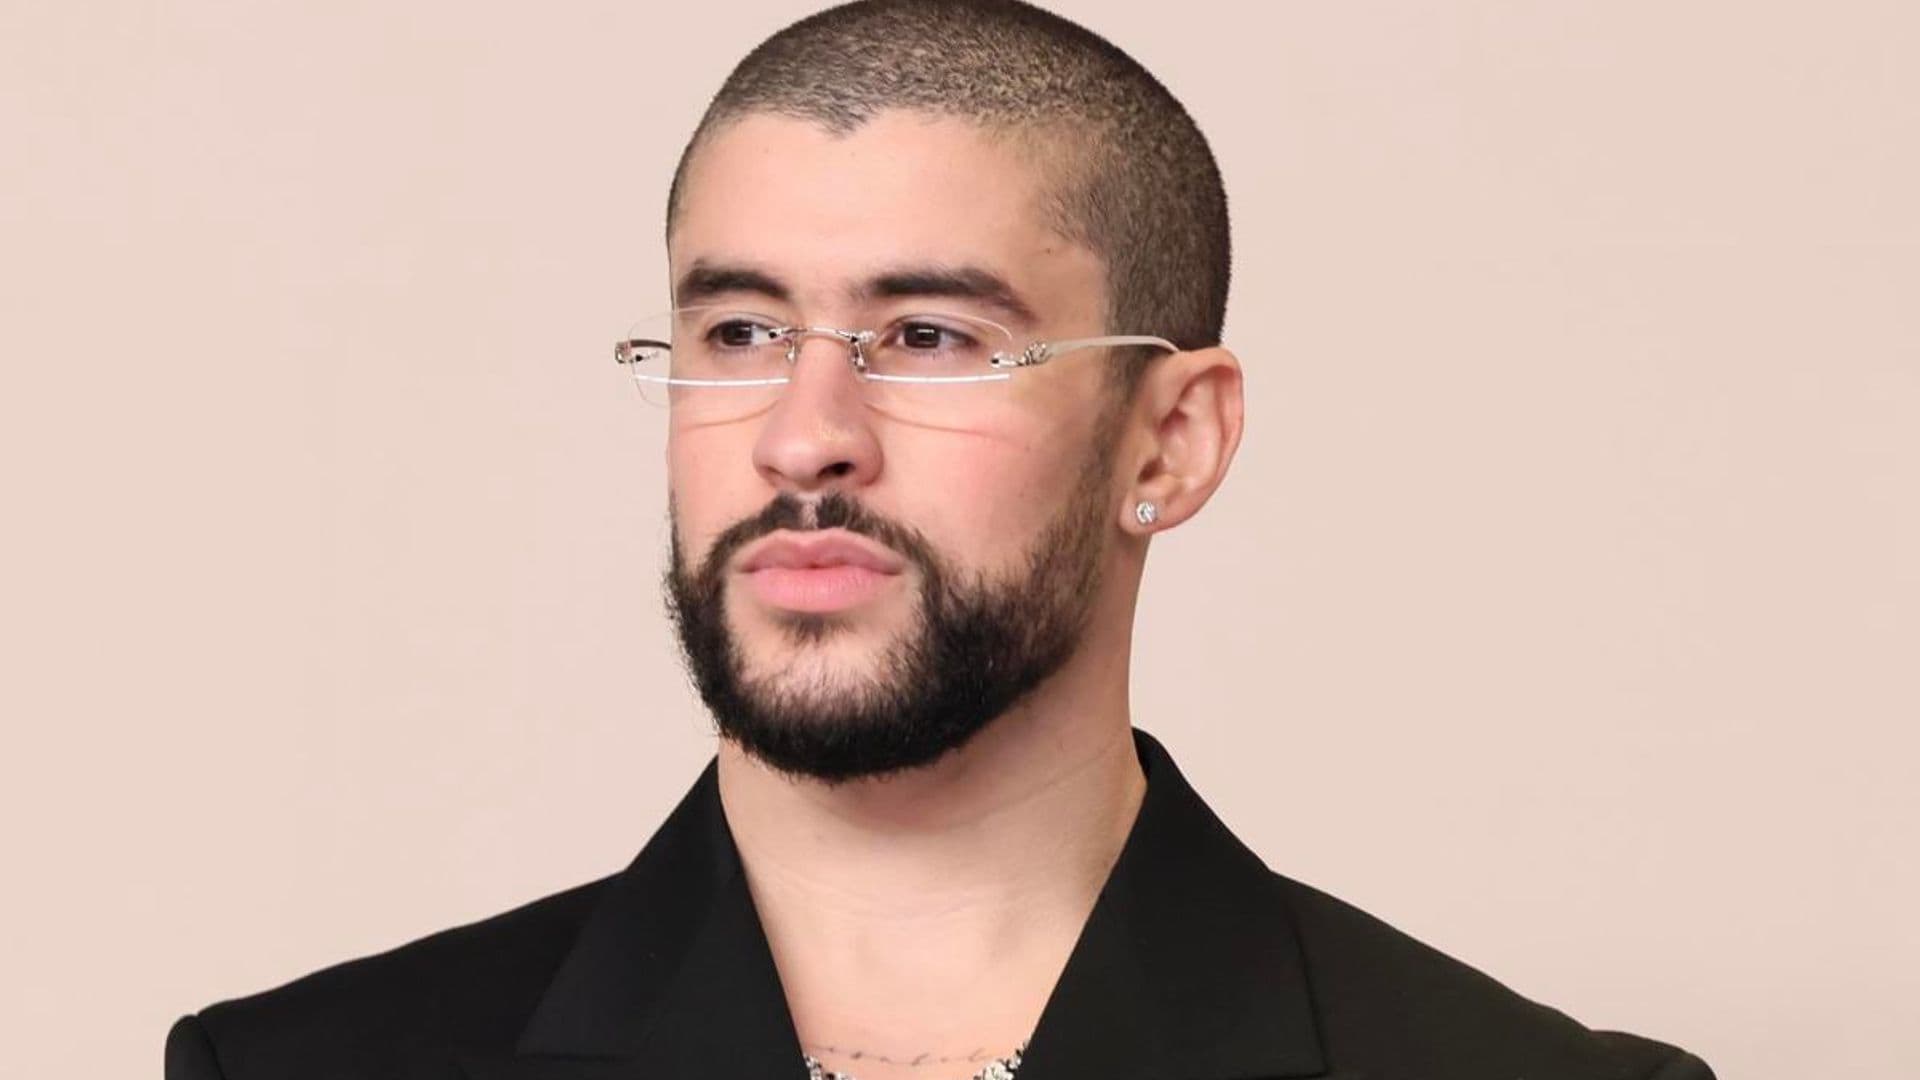 Bad Bunny shares details on his Met Gala look as co-chair for the evening